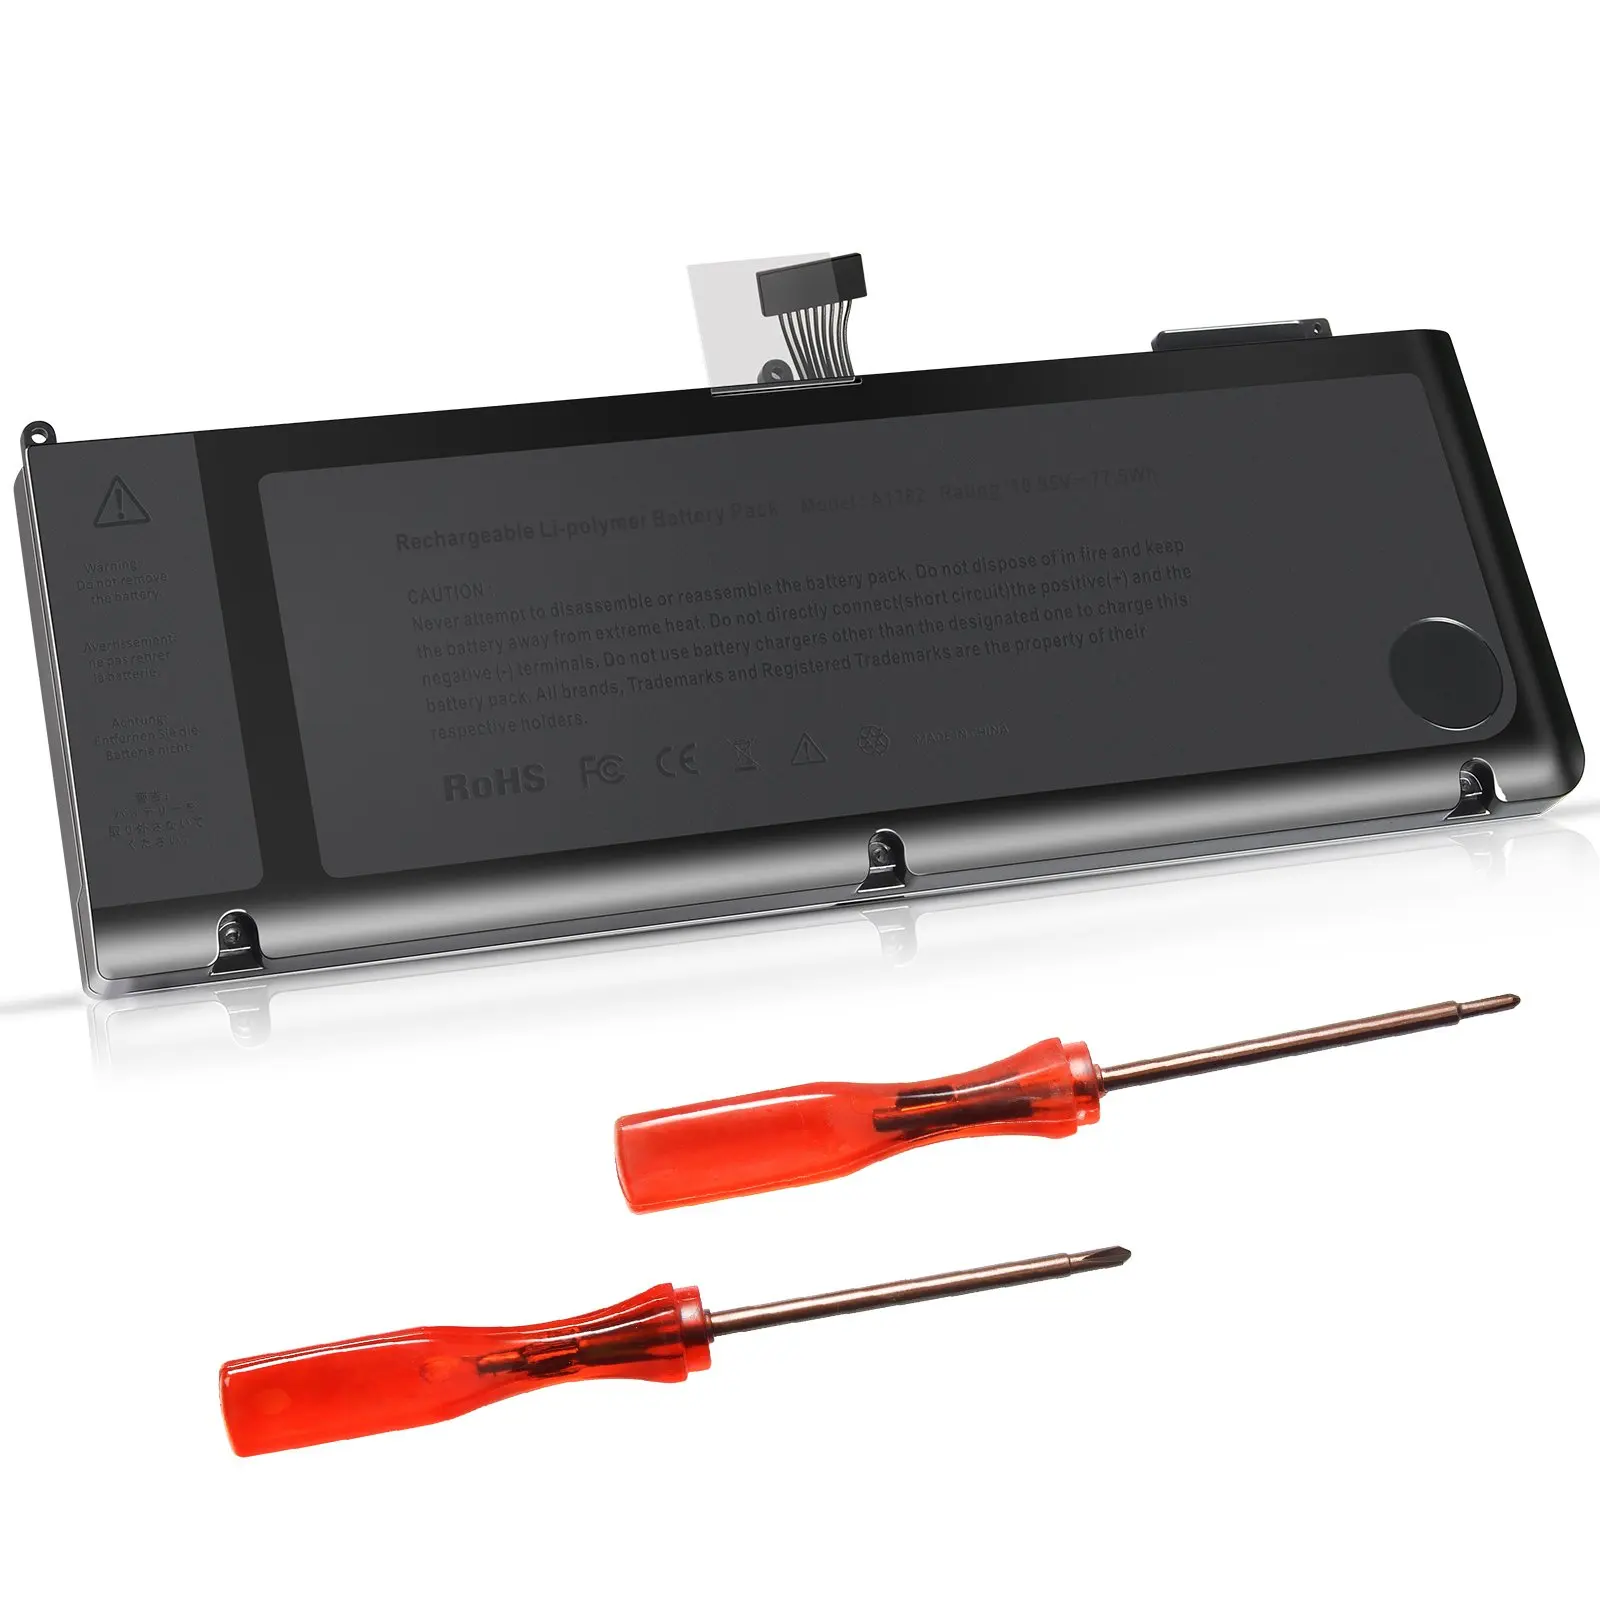 macbook pro 15 early 2011 battery replacement